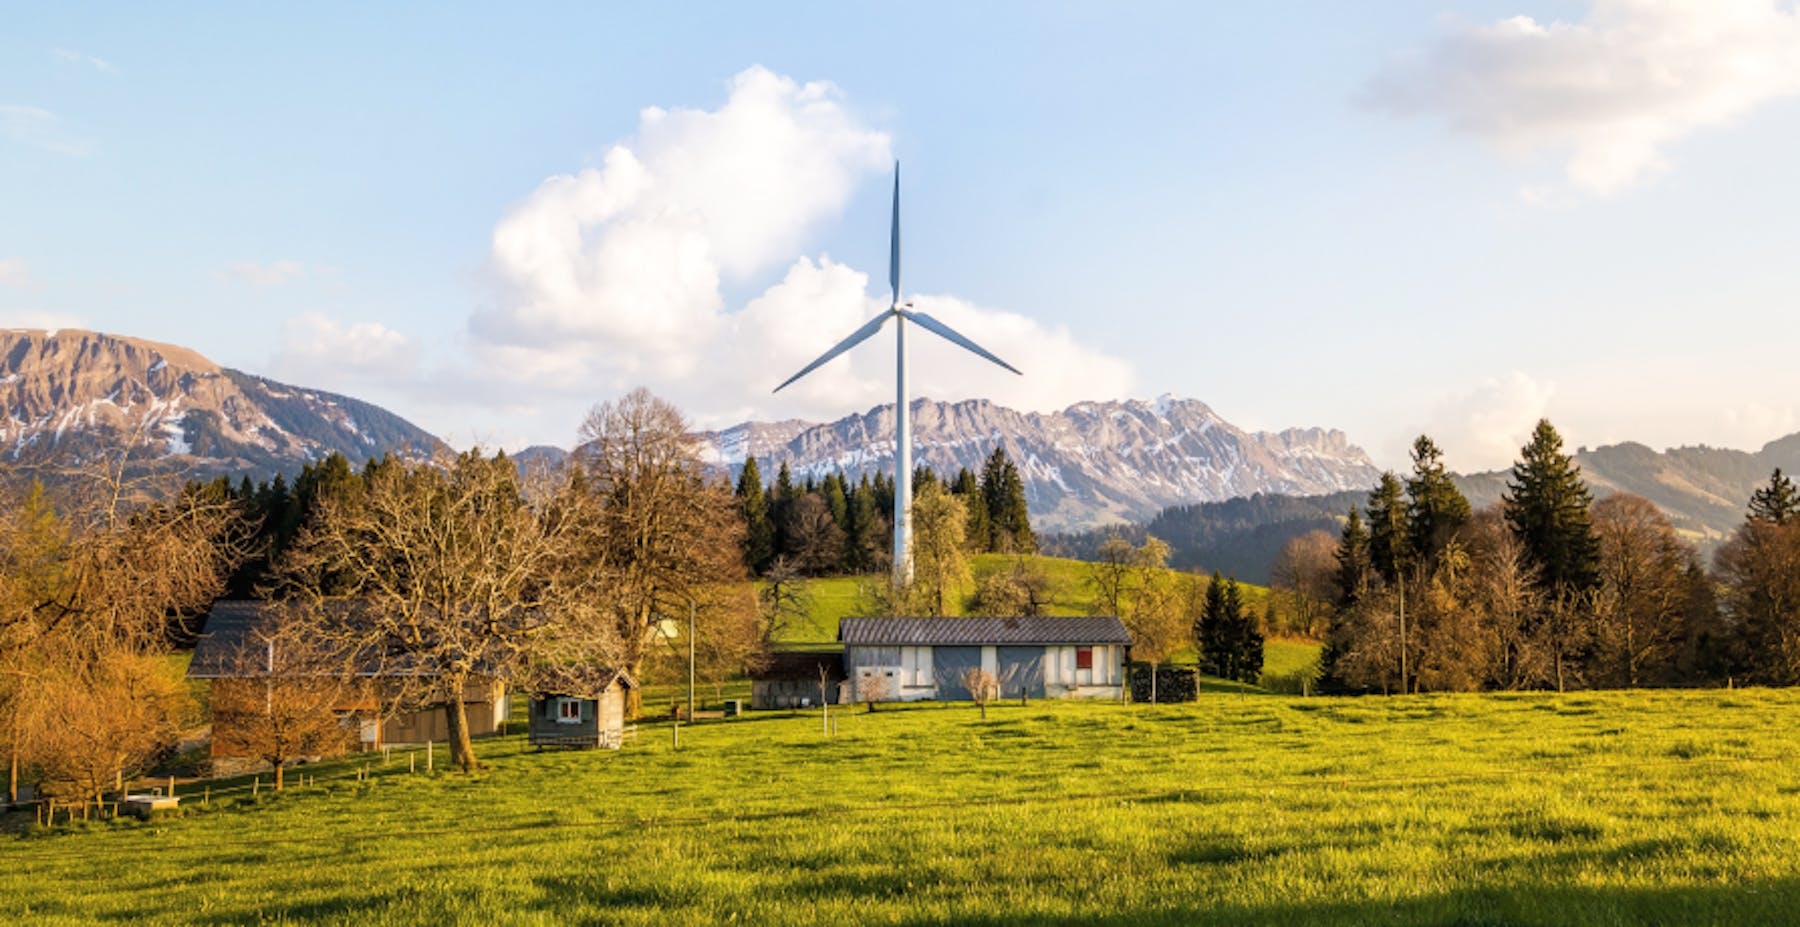 house in the countryside with a wind turbine behind it